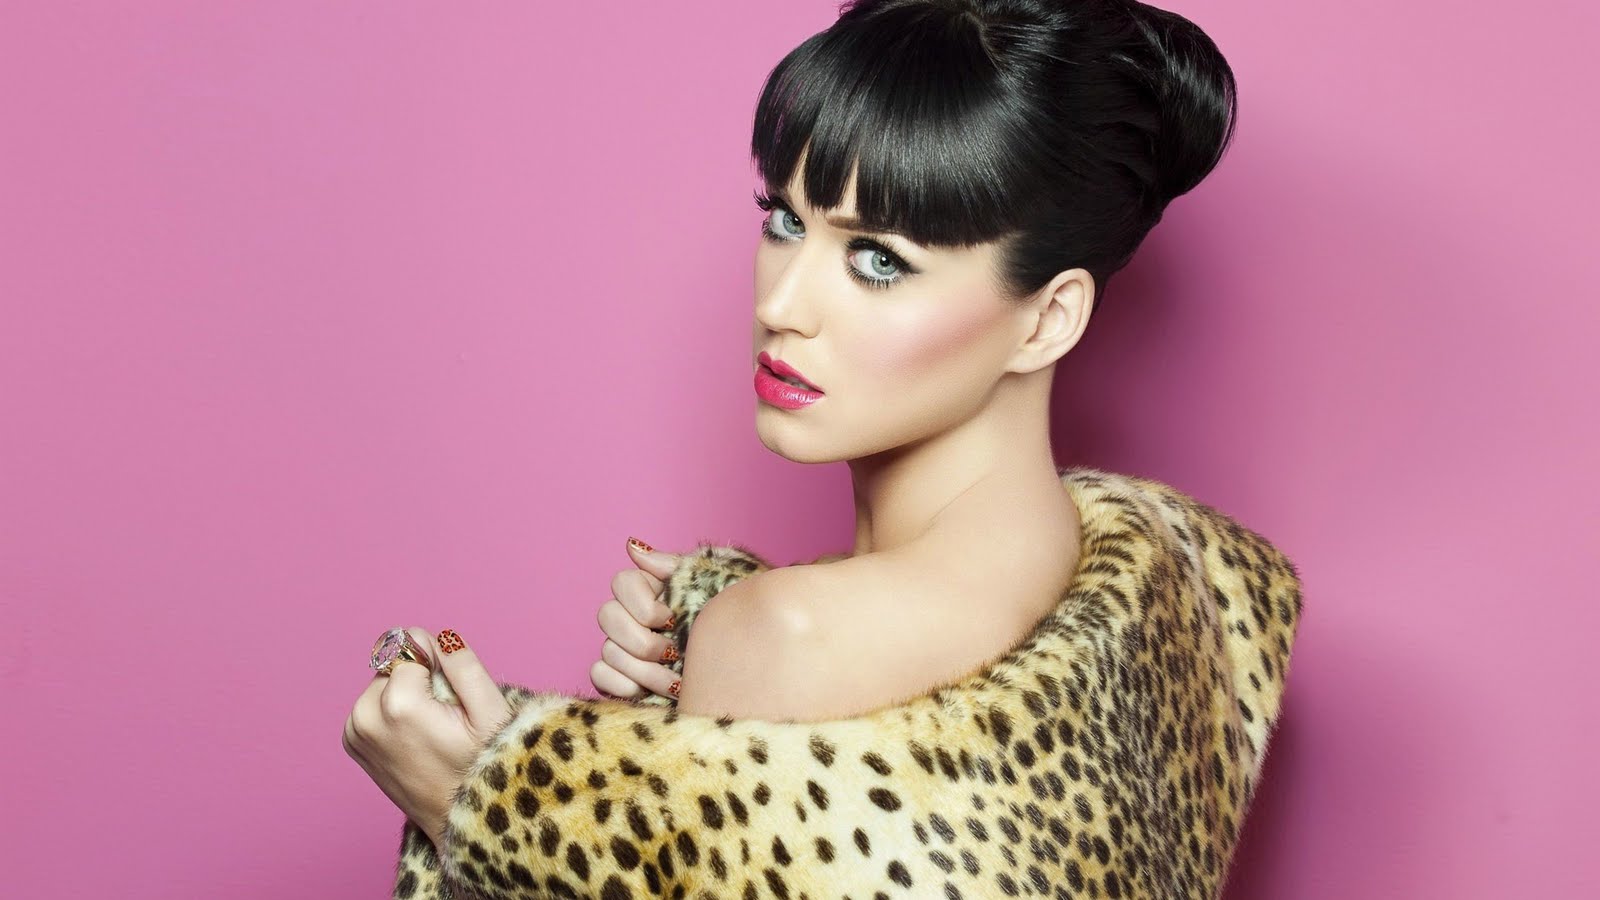 Katy Perry Picture - Image Abyss